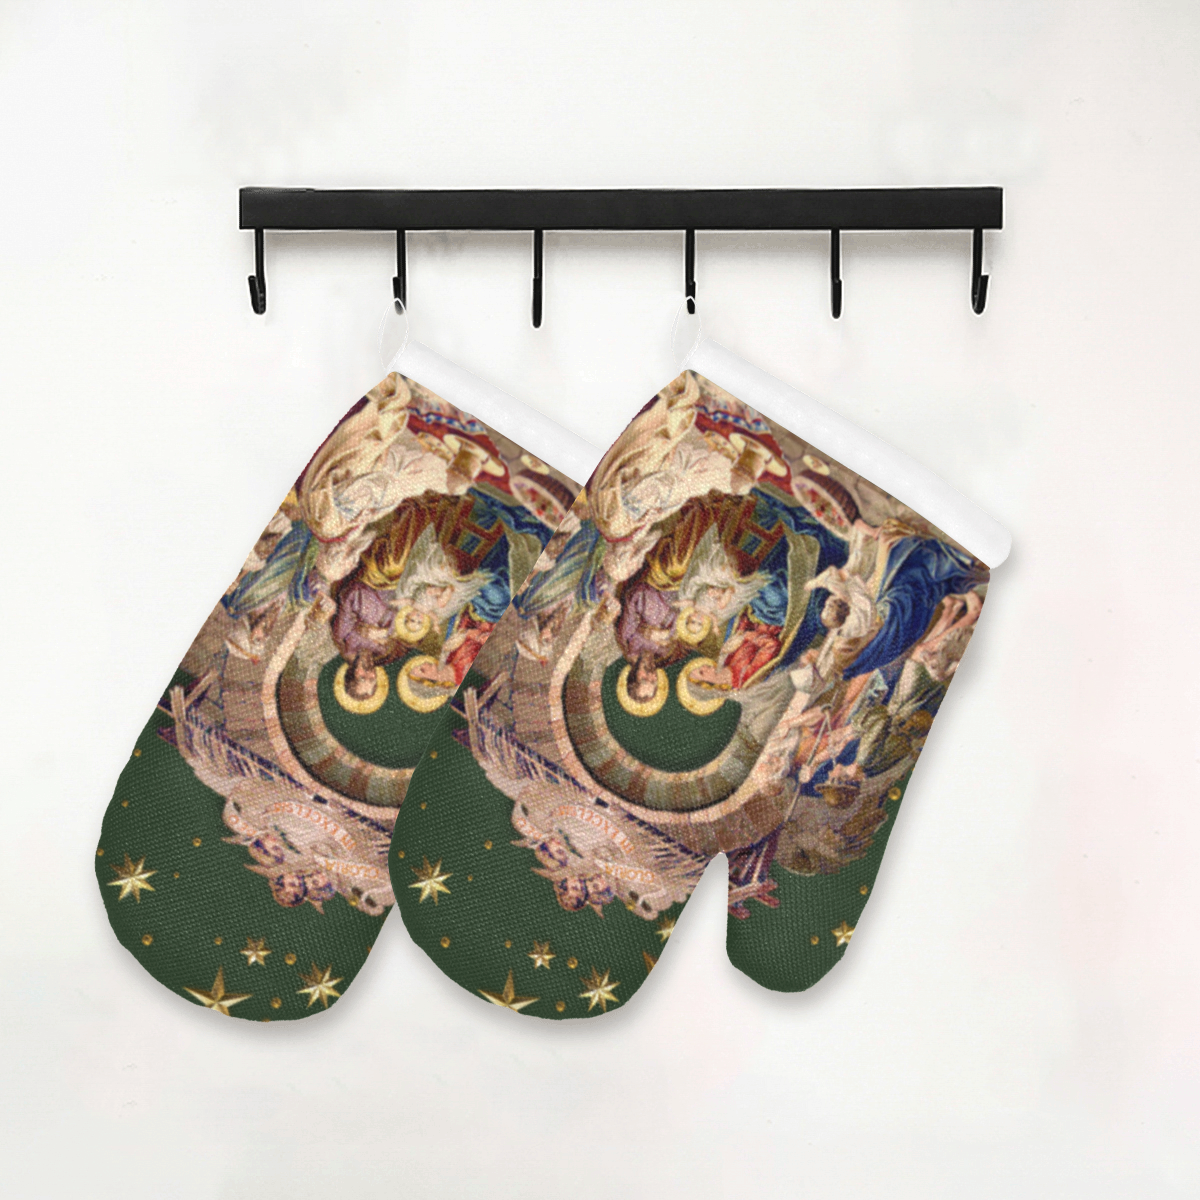 Nativity Oven Mittens Forrest Green (1c3119) Oven Mitt (Two Pieces)